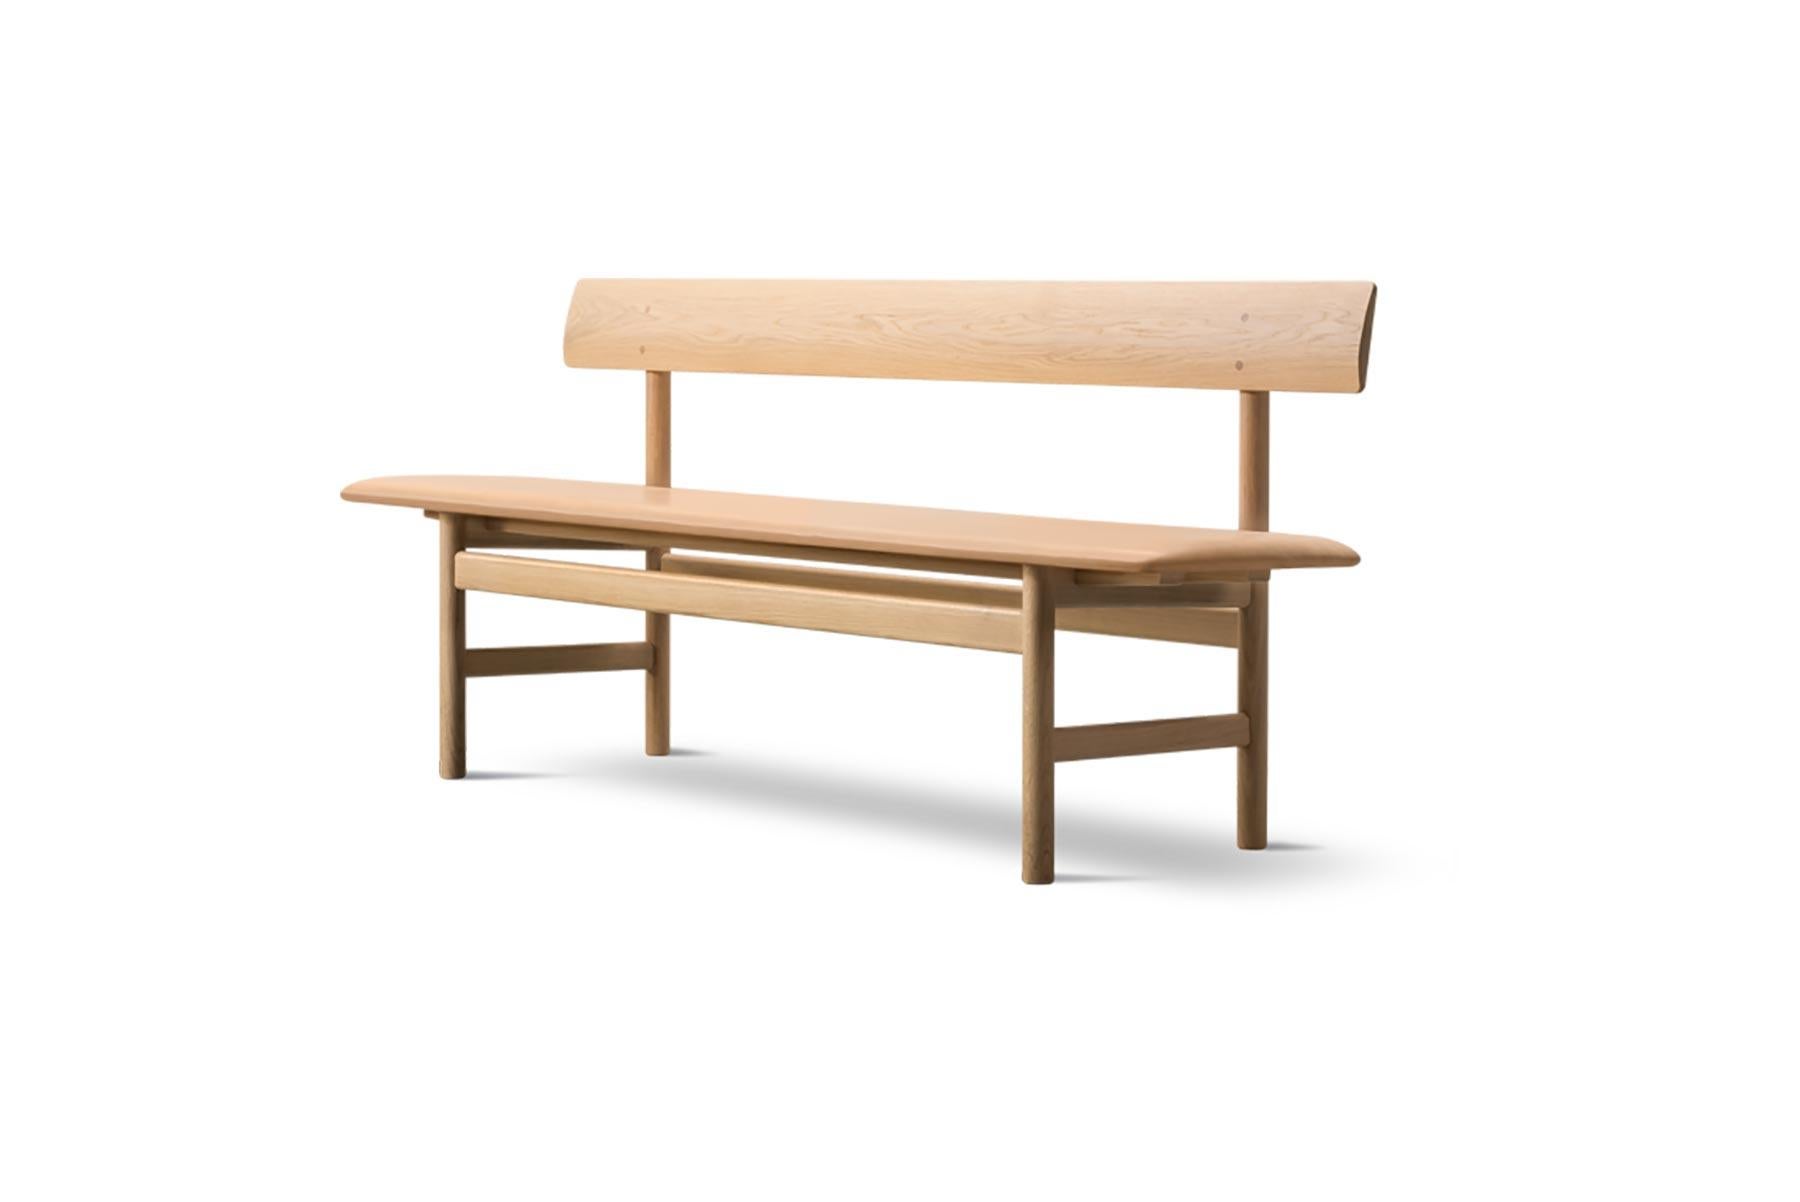 Børge Mogensen designed this solid wood dining bench in 1956. With its robust simplicity the bench is an ideal example of Mogensen’s lifelong drive for a purified shape.

    

    